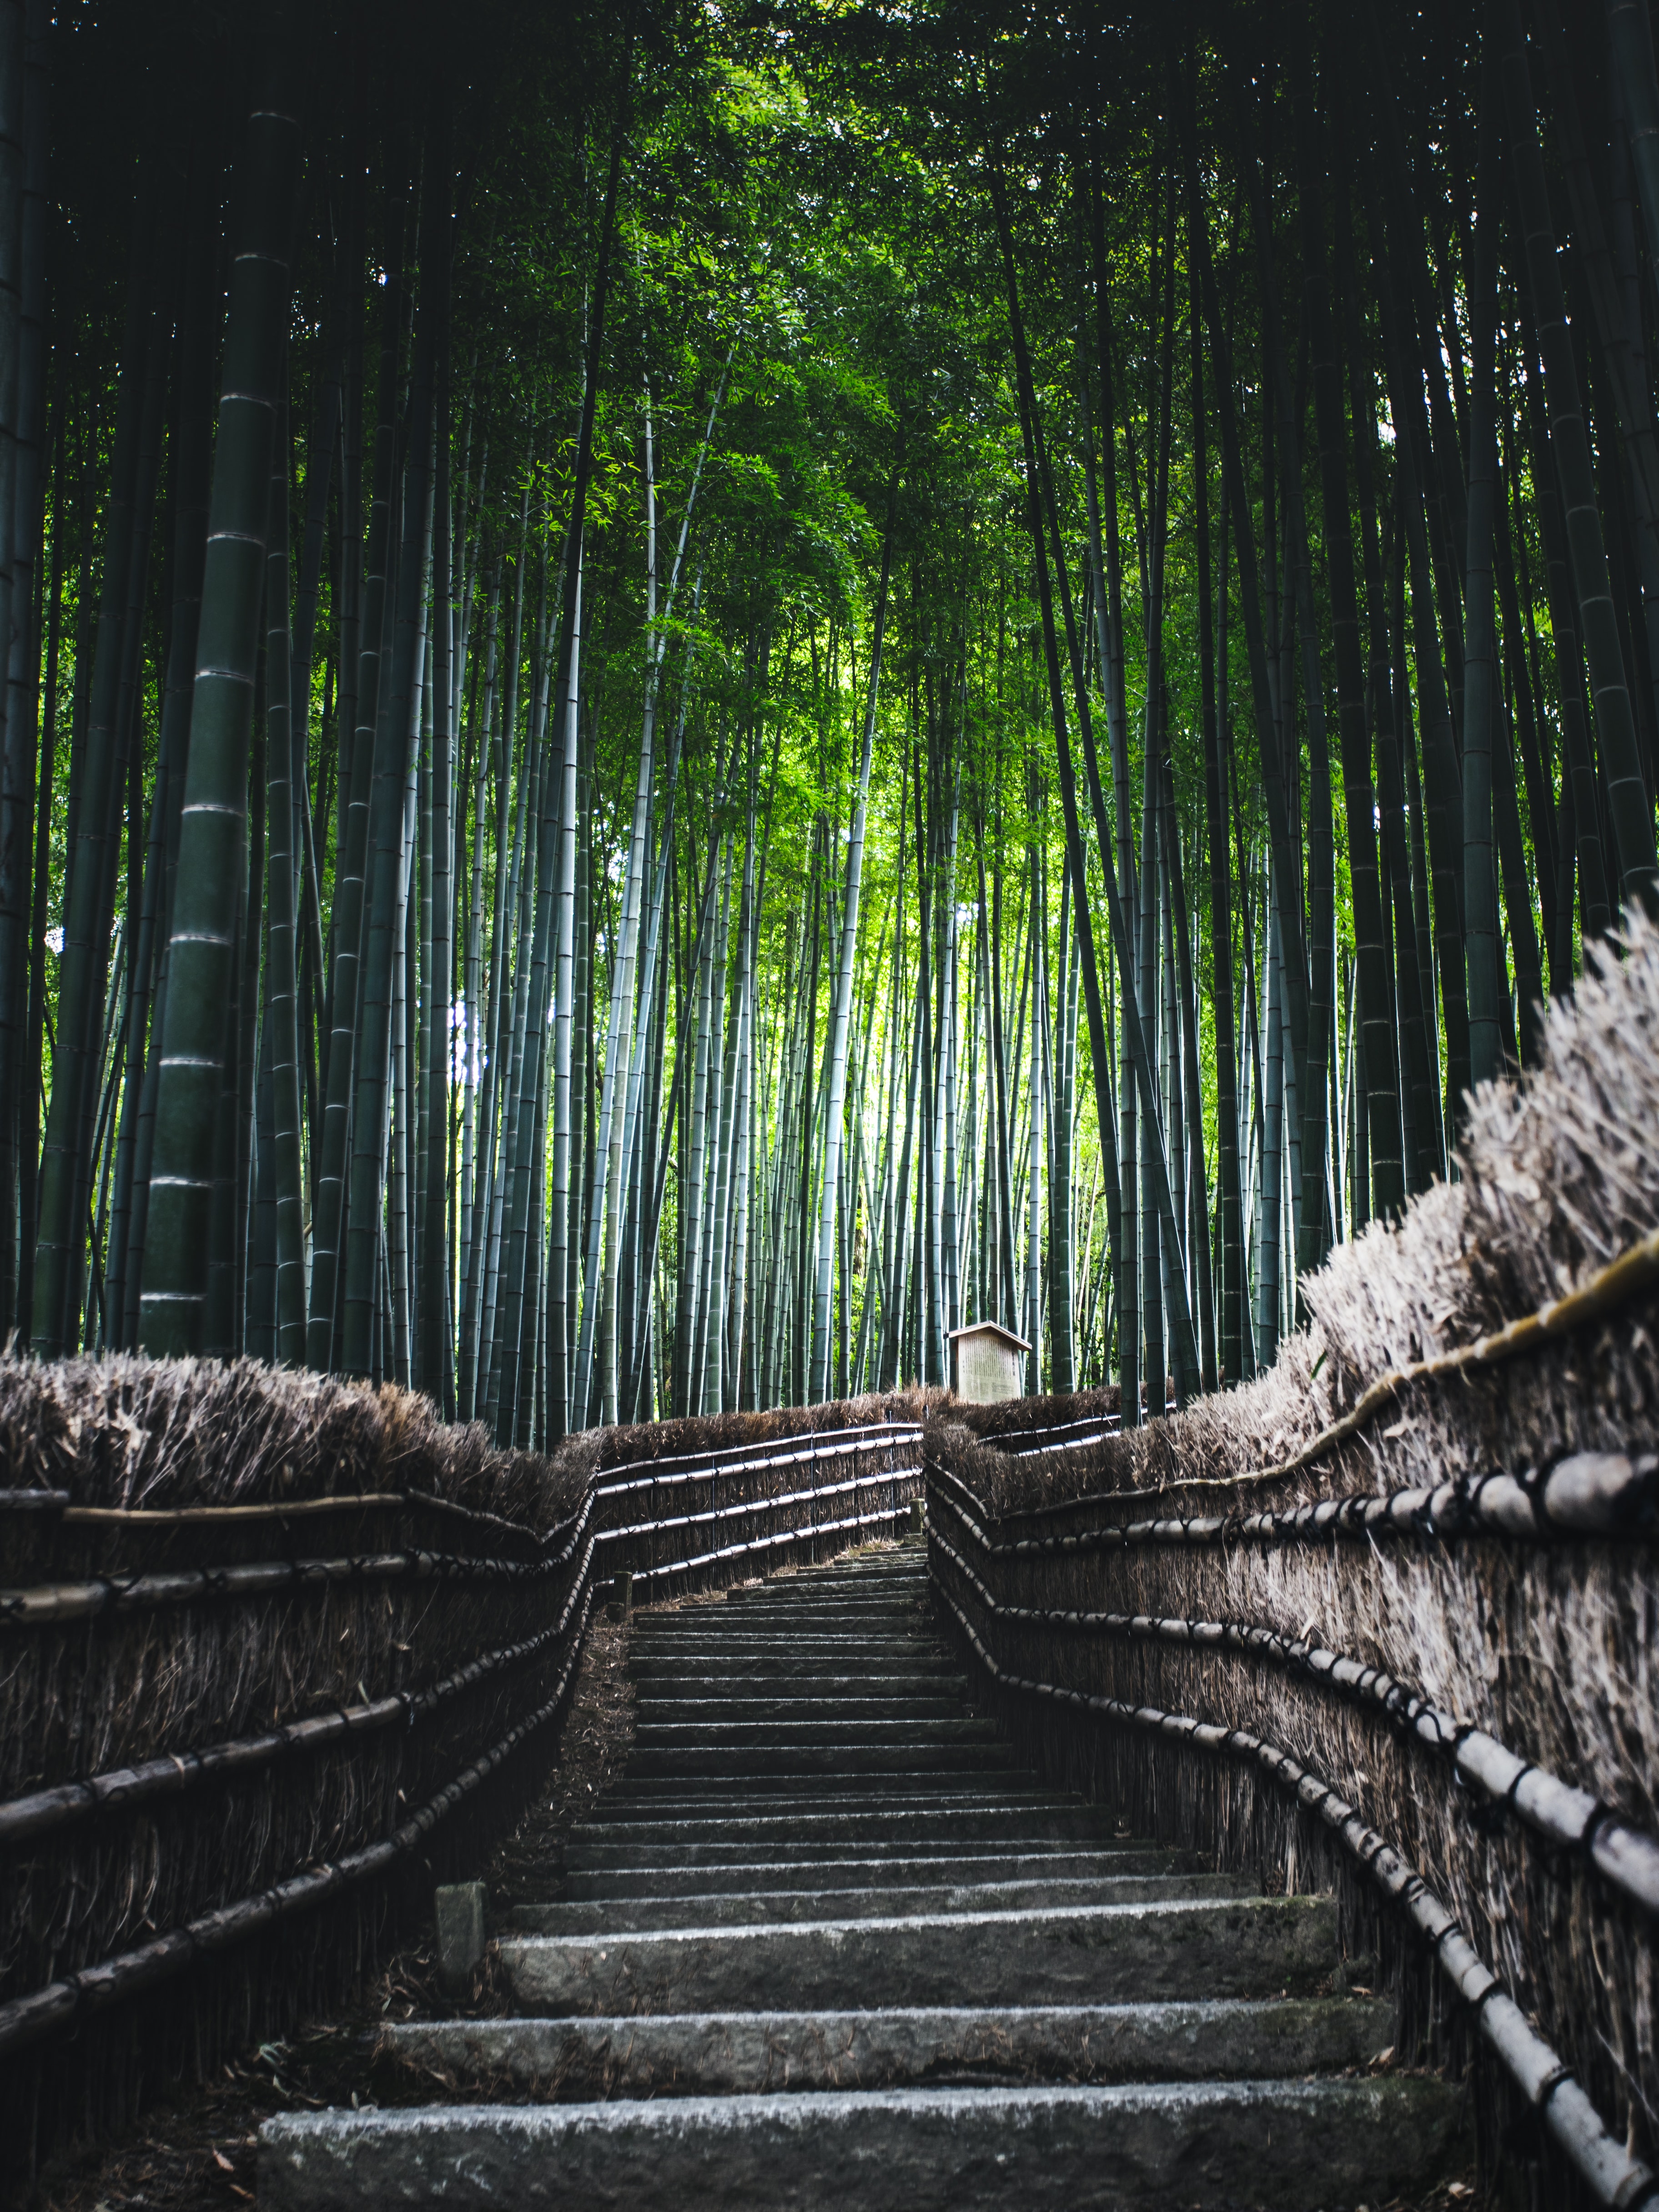 bamboo, nature, forest, trees, stairs, ladder lock screen backgrounds